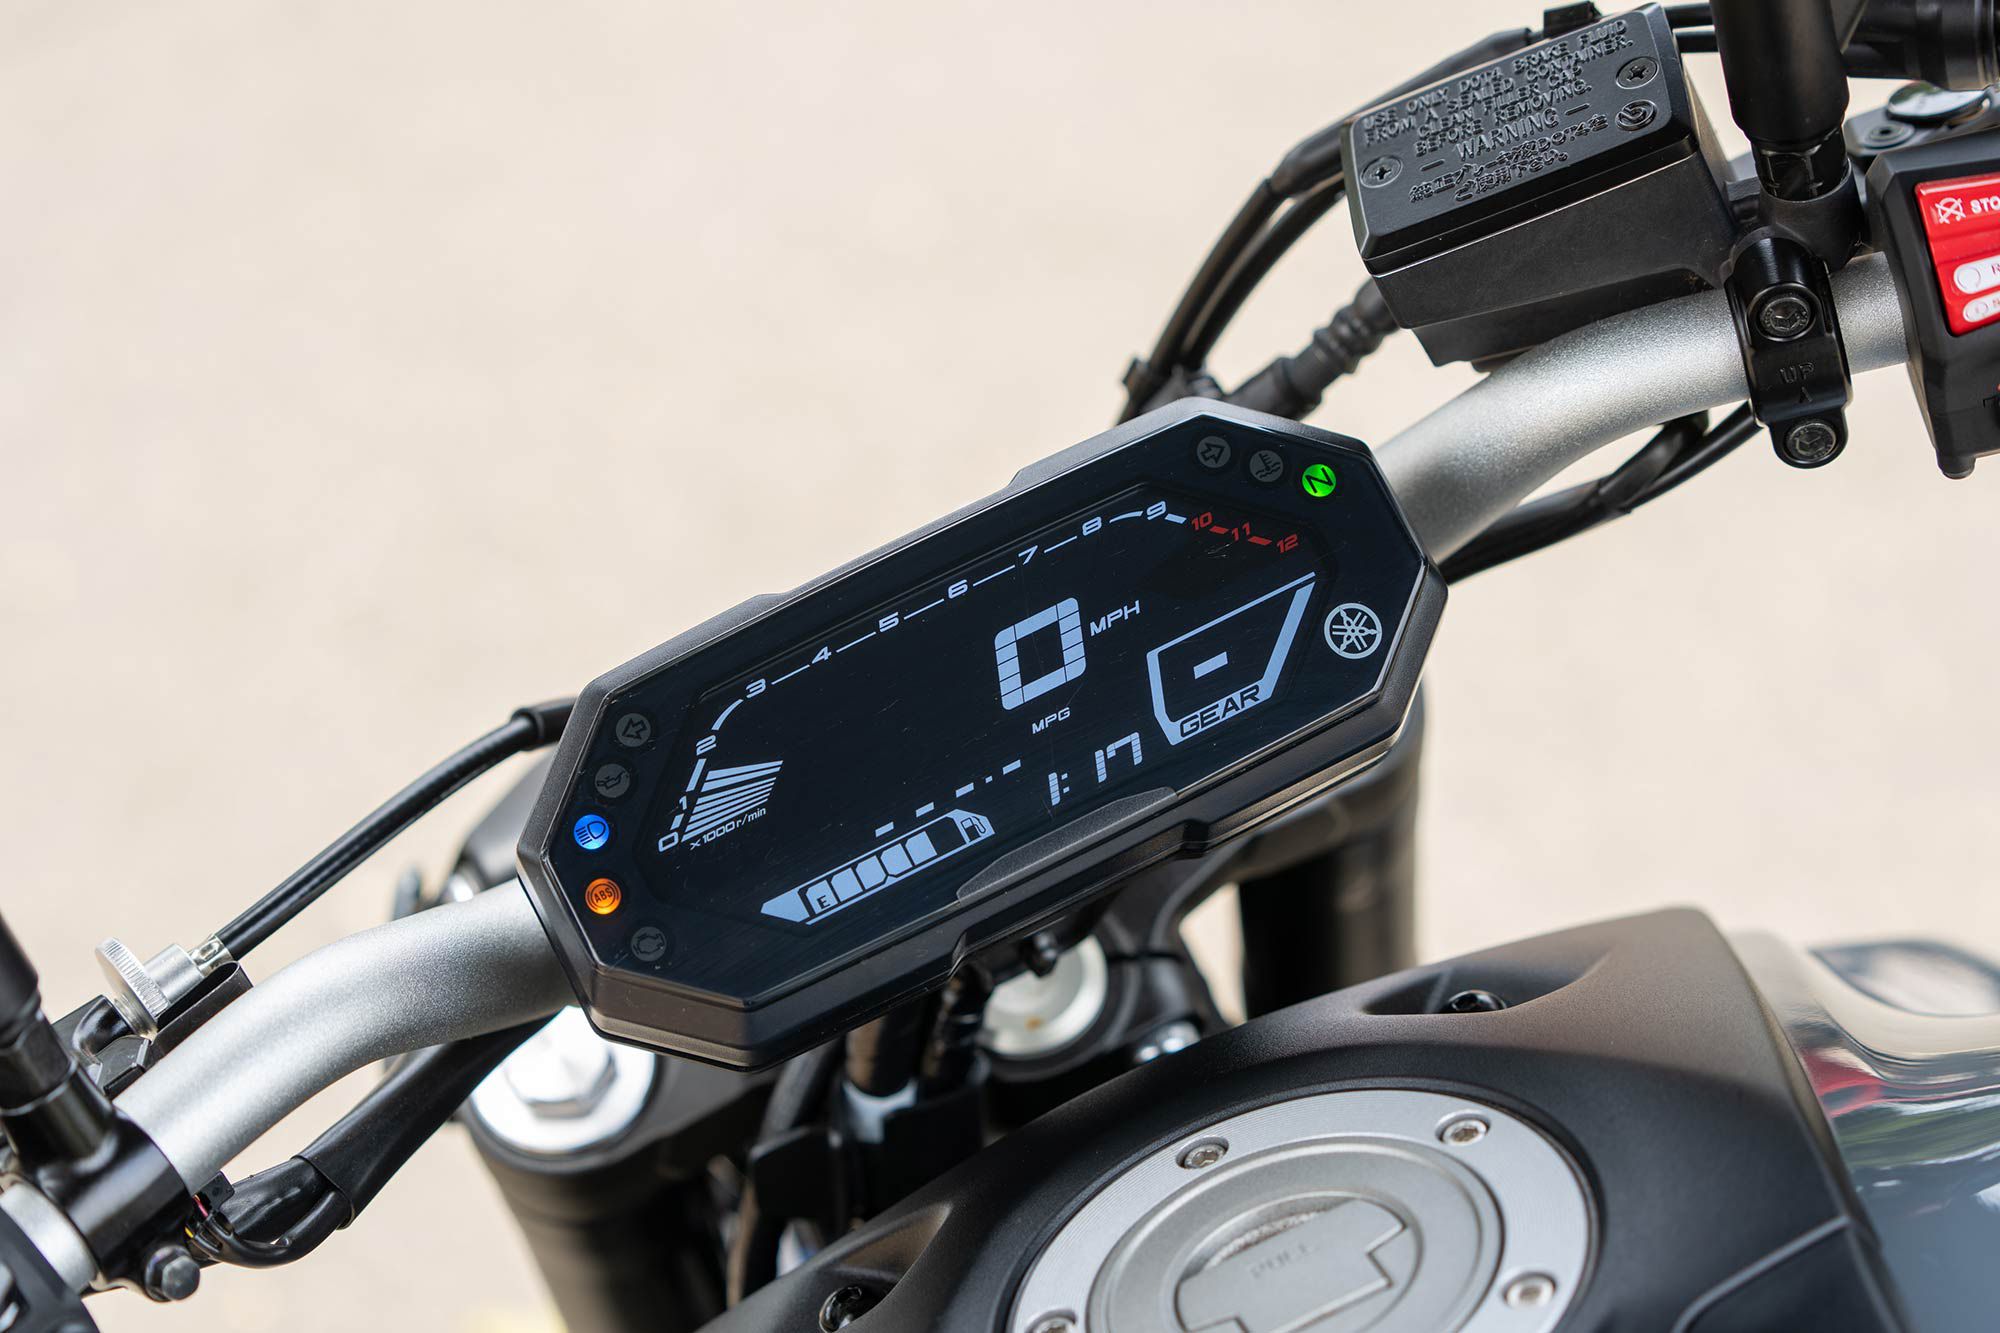 The instrument package is easy to read day and night. We like that screen brightness can be adjusted for night riding.